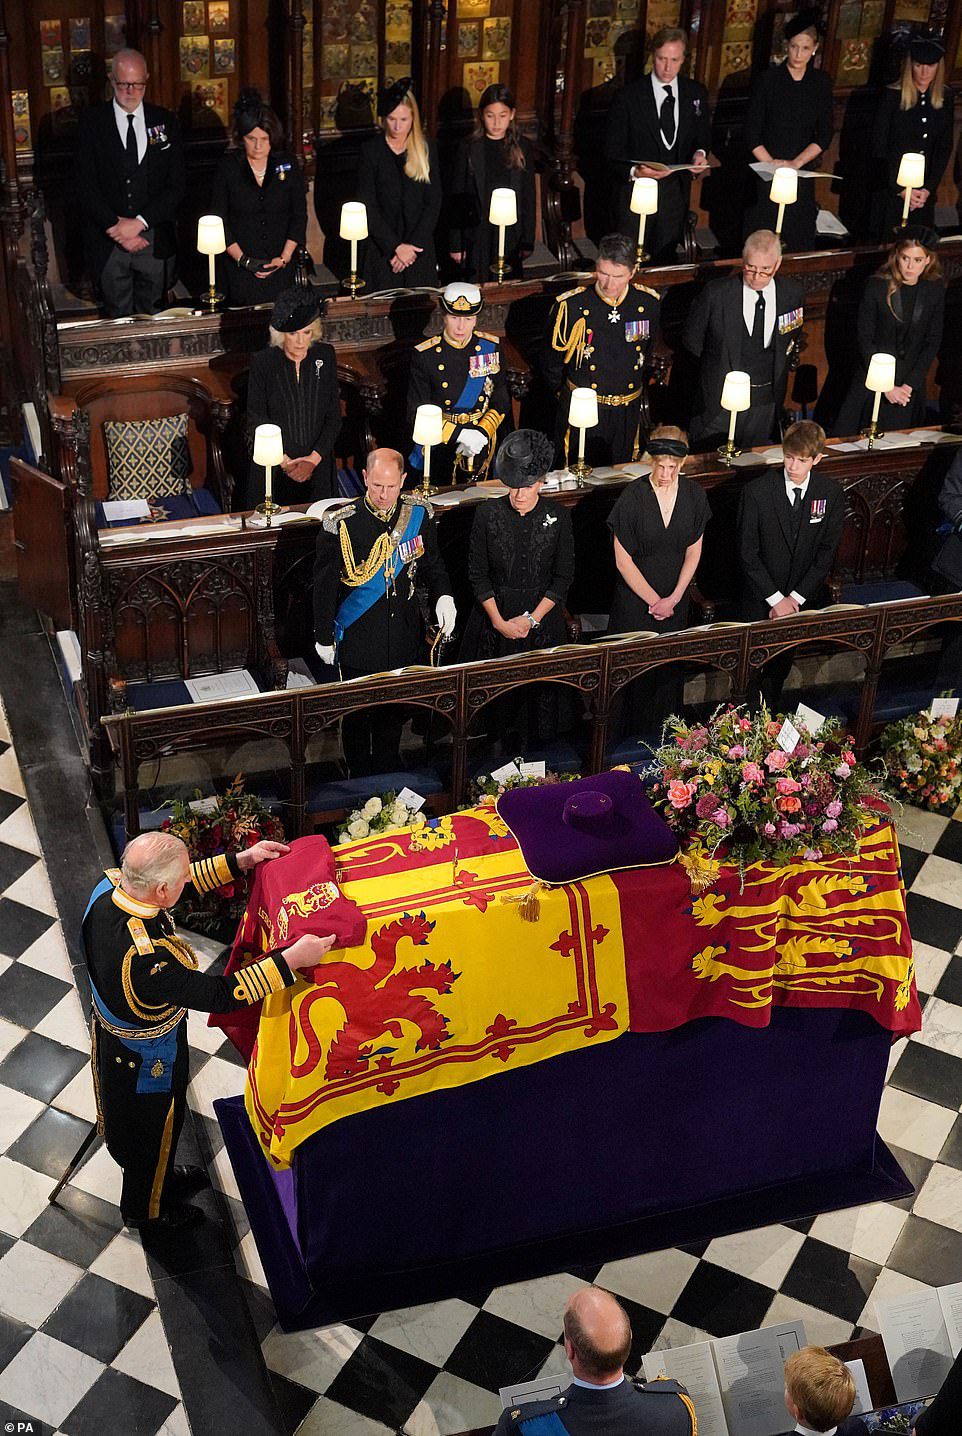 King Charles III lays the color of the Queen's Company's camp of the Grenadier Guards on Her Majesty's coffin at Monday's commissioning ceremony